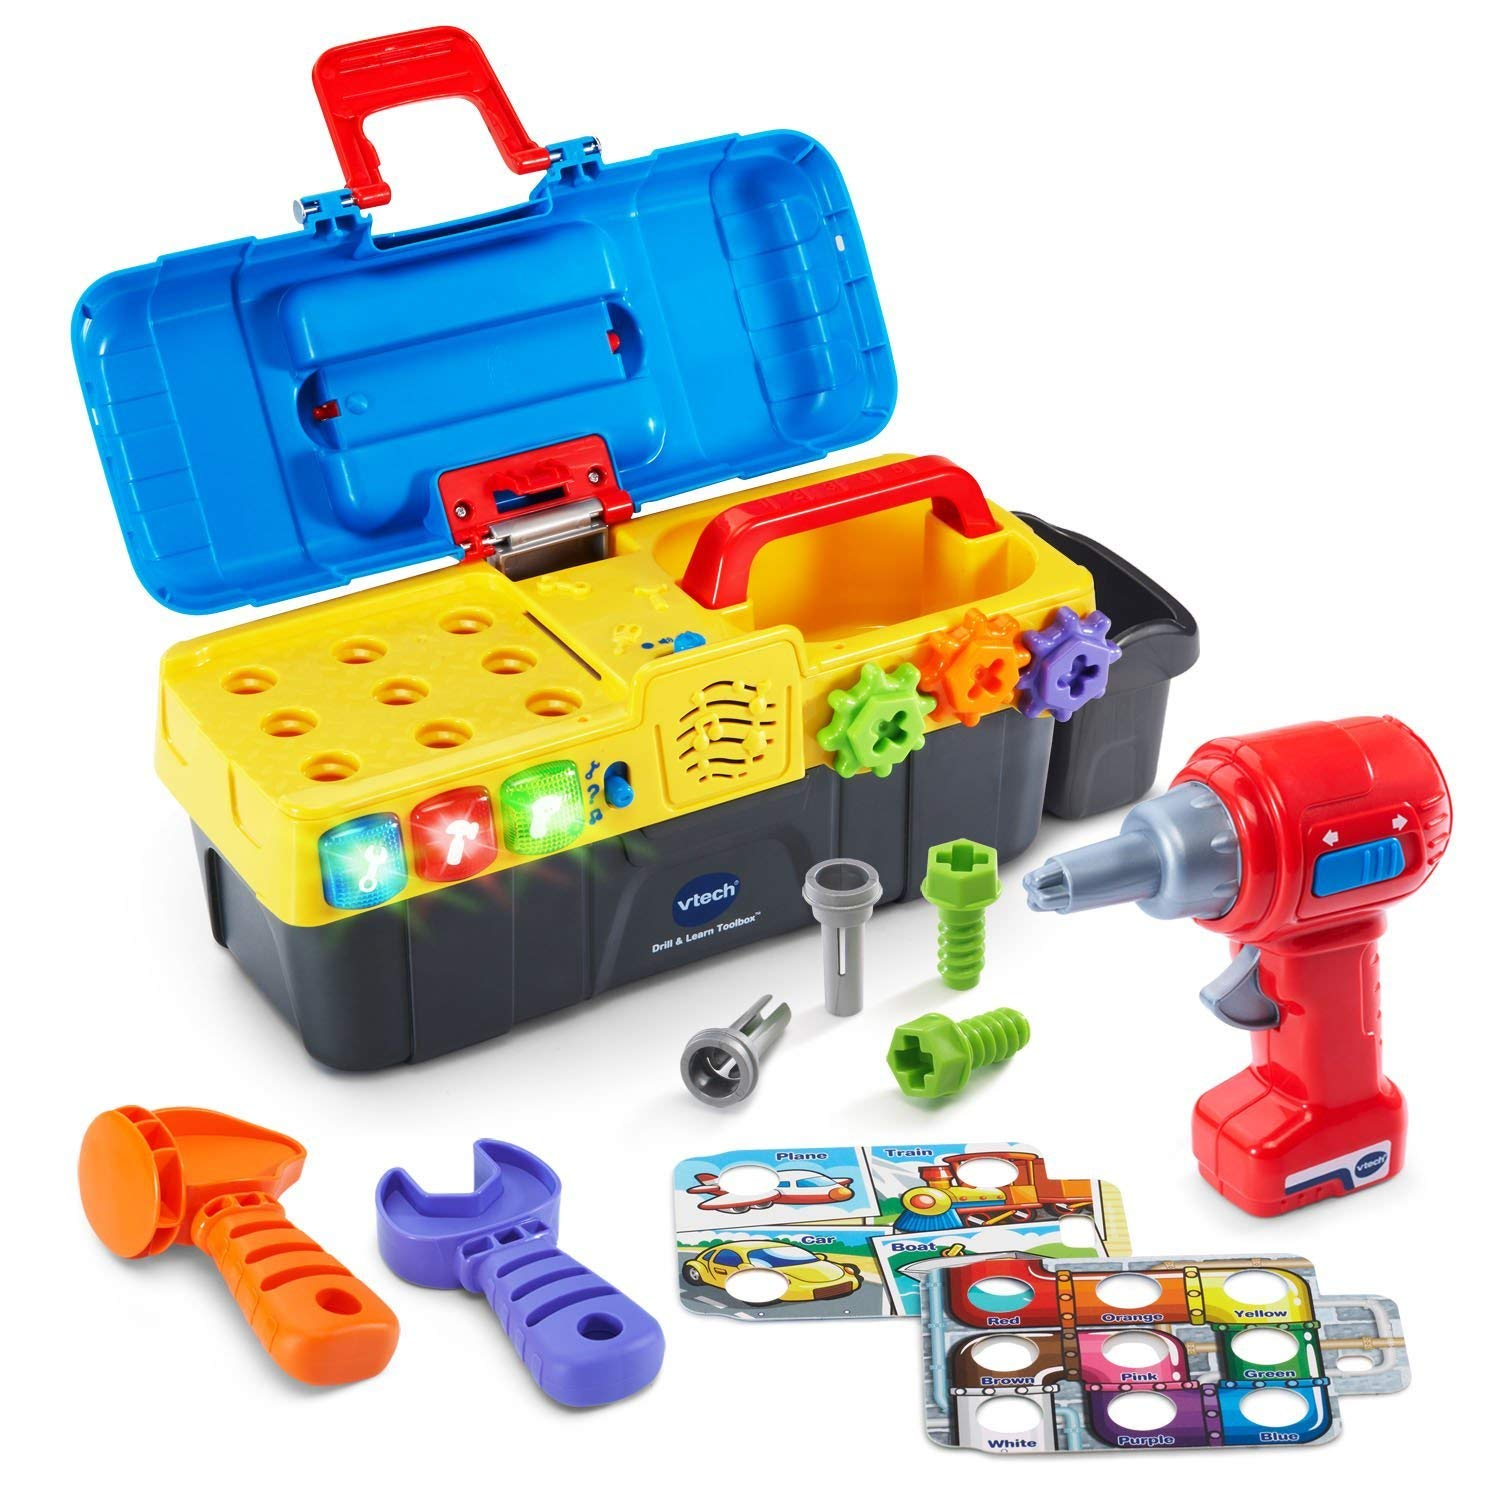 VTech Drill & Learn Toolbox Only $15.00!